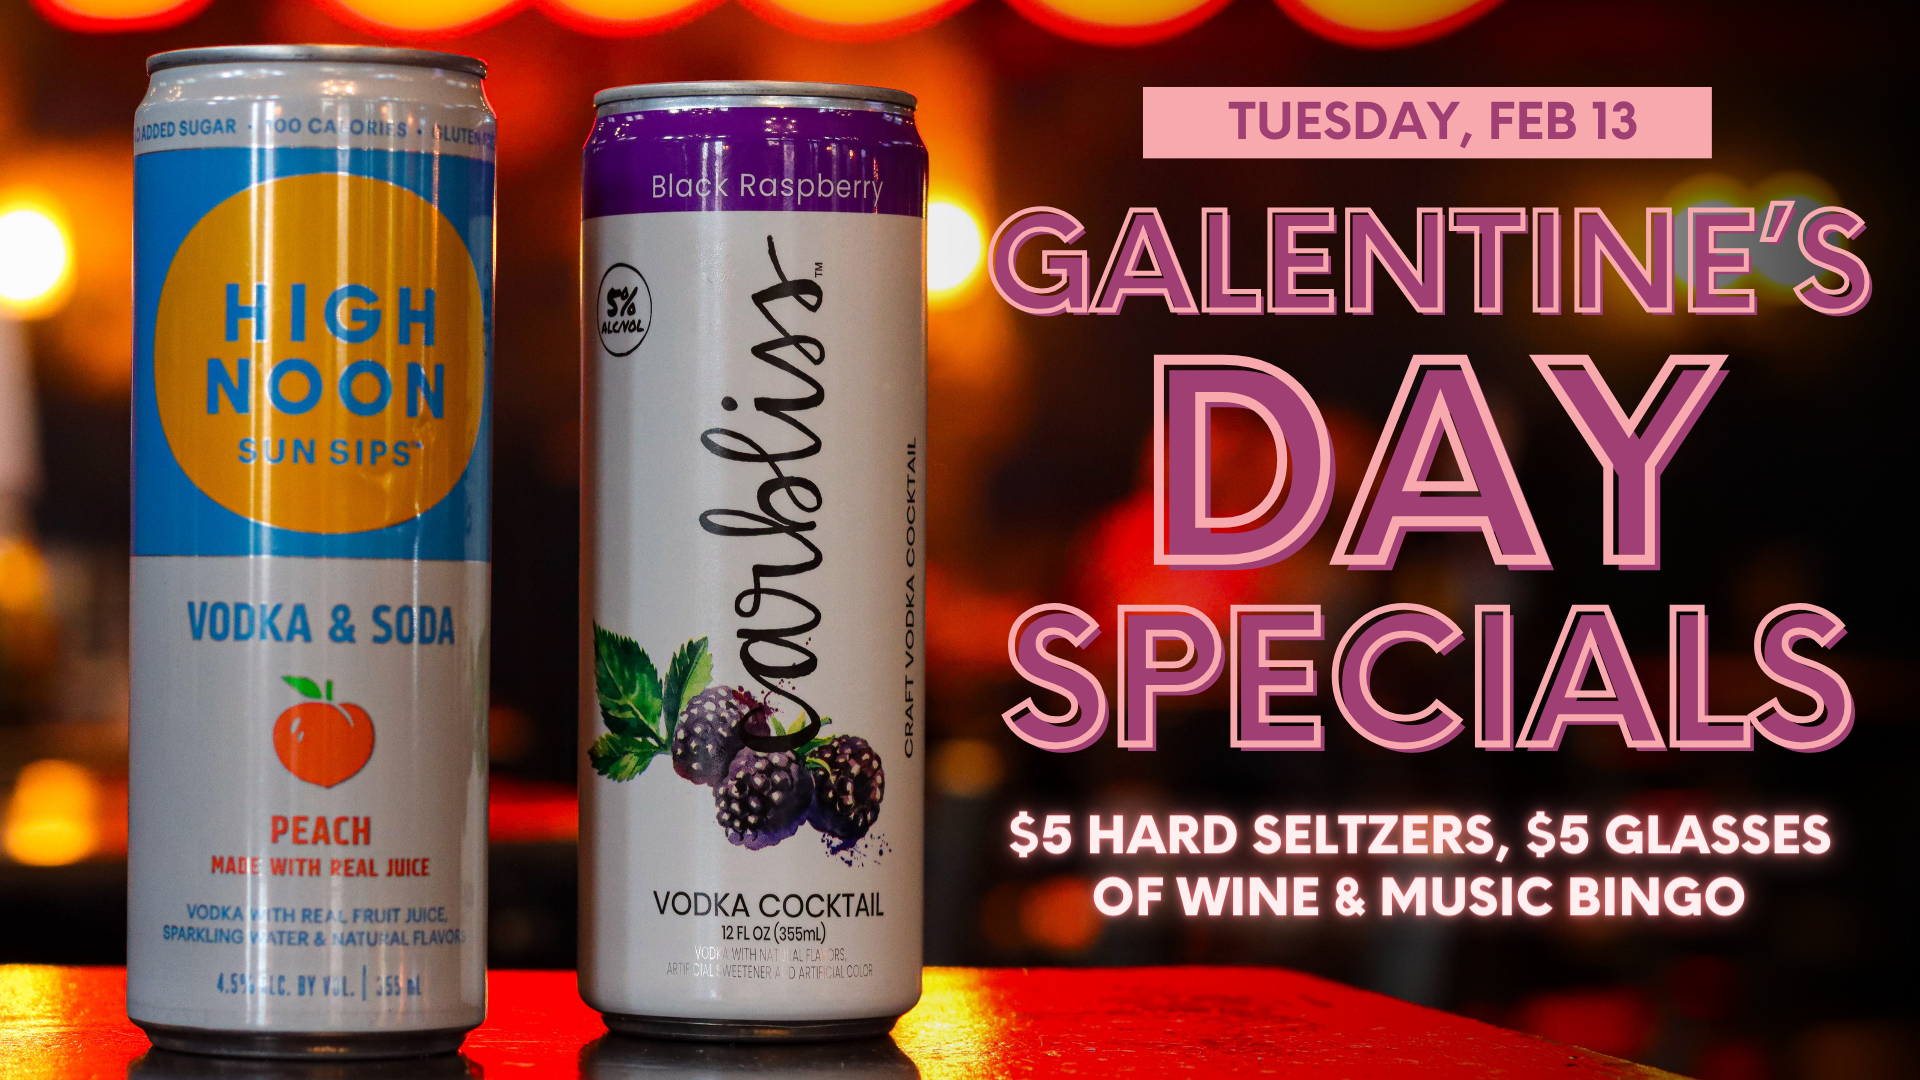 Galentine's Day Specials at On Tap